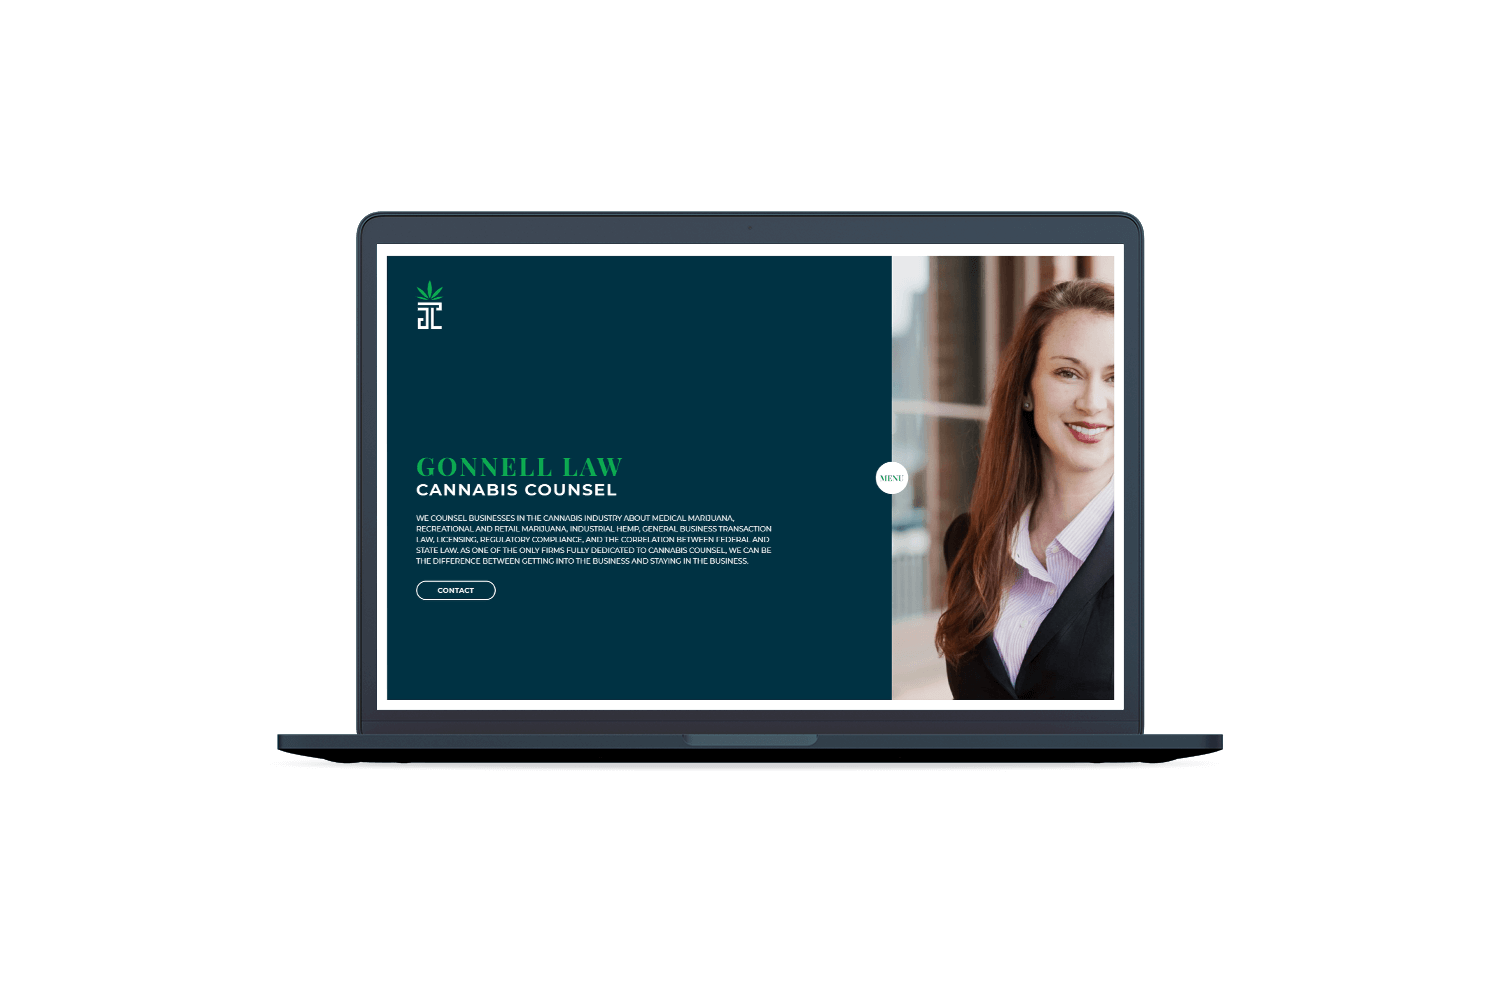 Gonnell Law web design